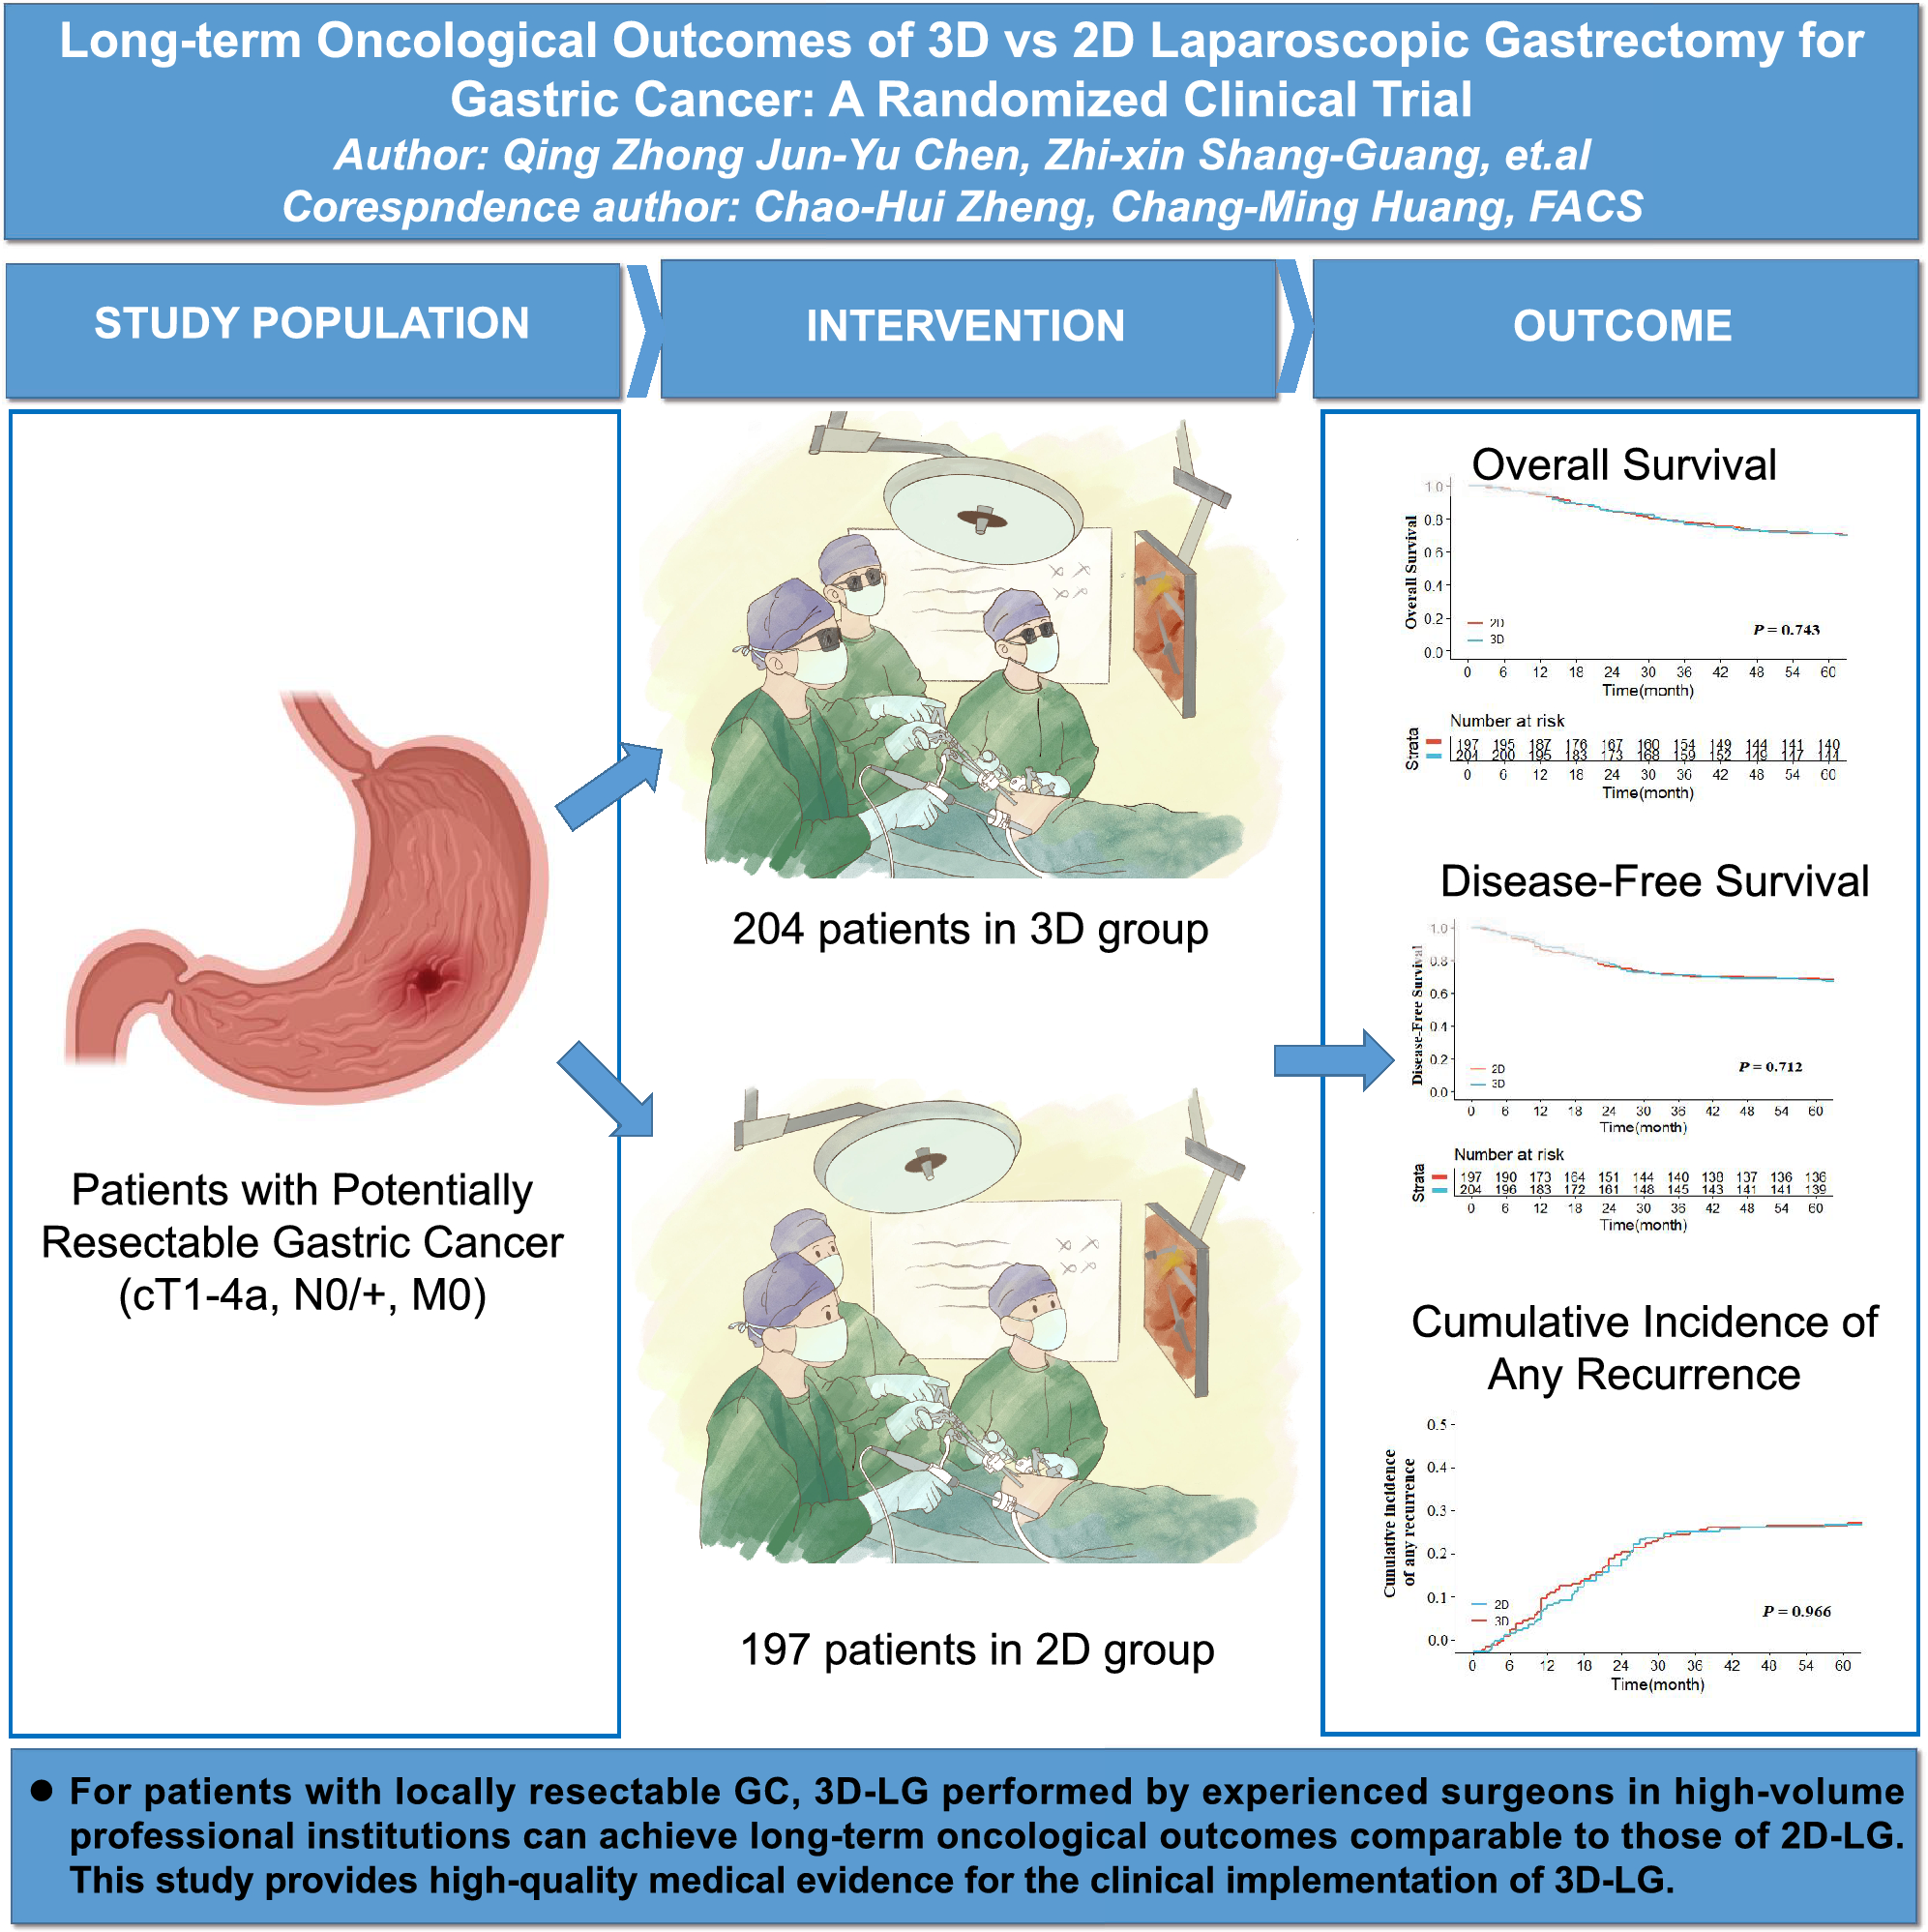 Long-term oncological outcomes of 3D versus 2D laparoscopic gastrectomy for gastric cancer: a randomized clinical trial